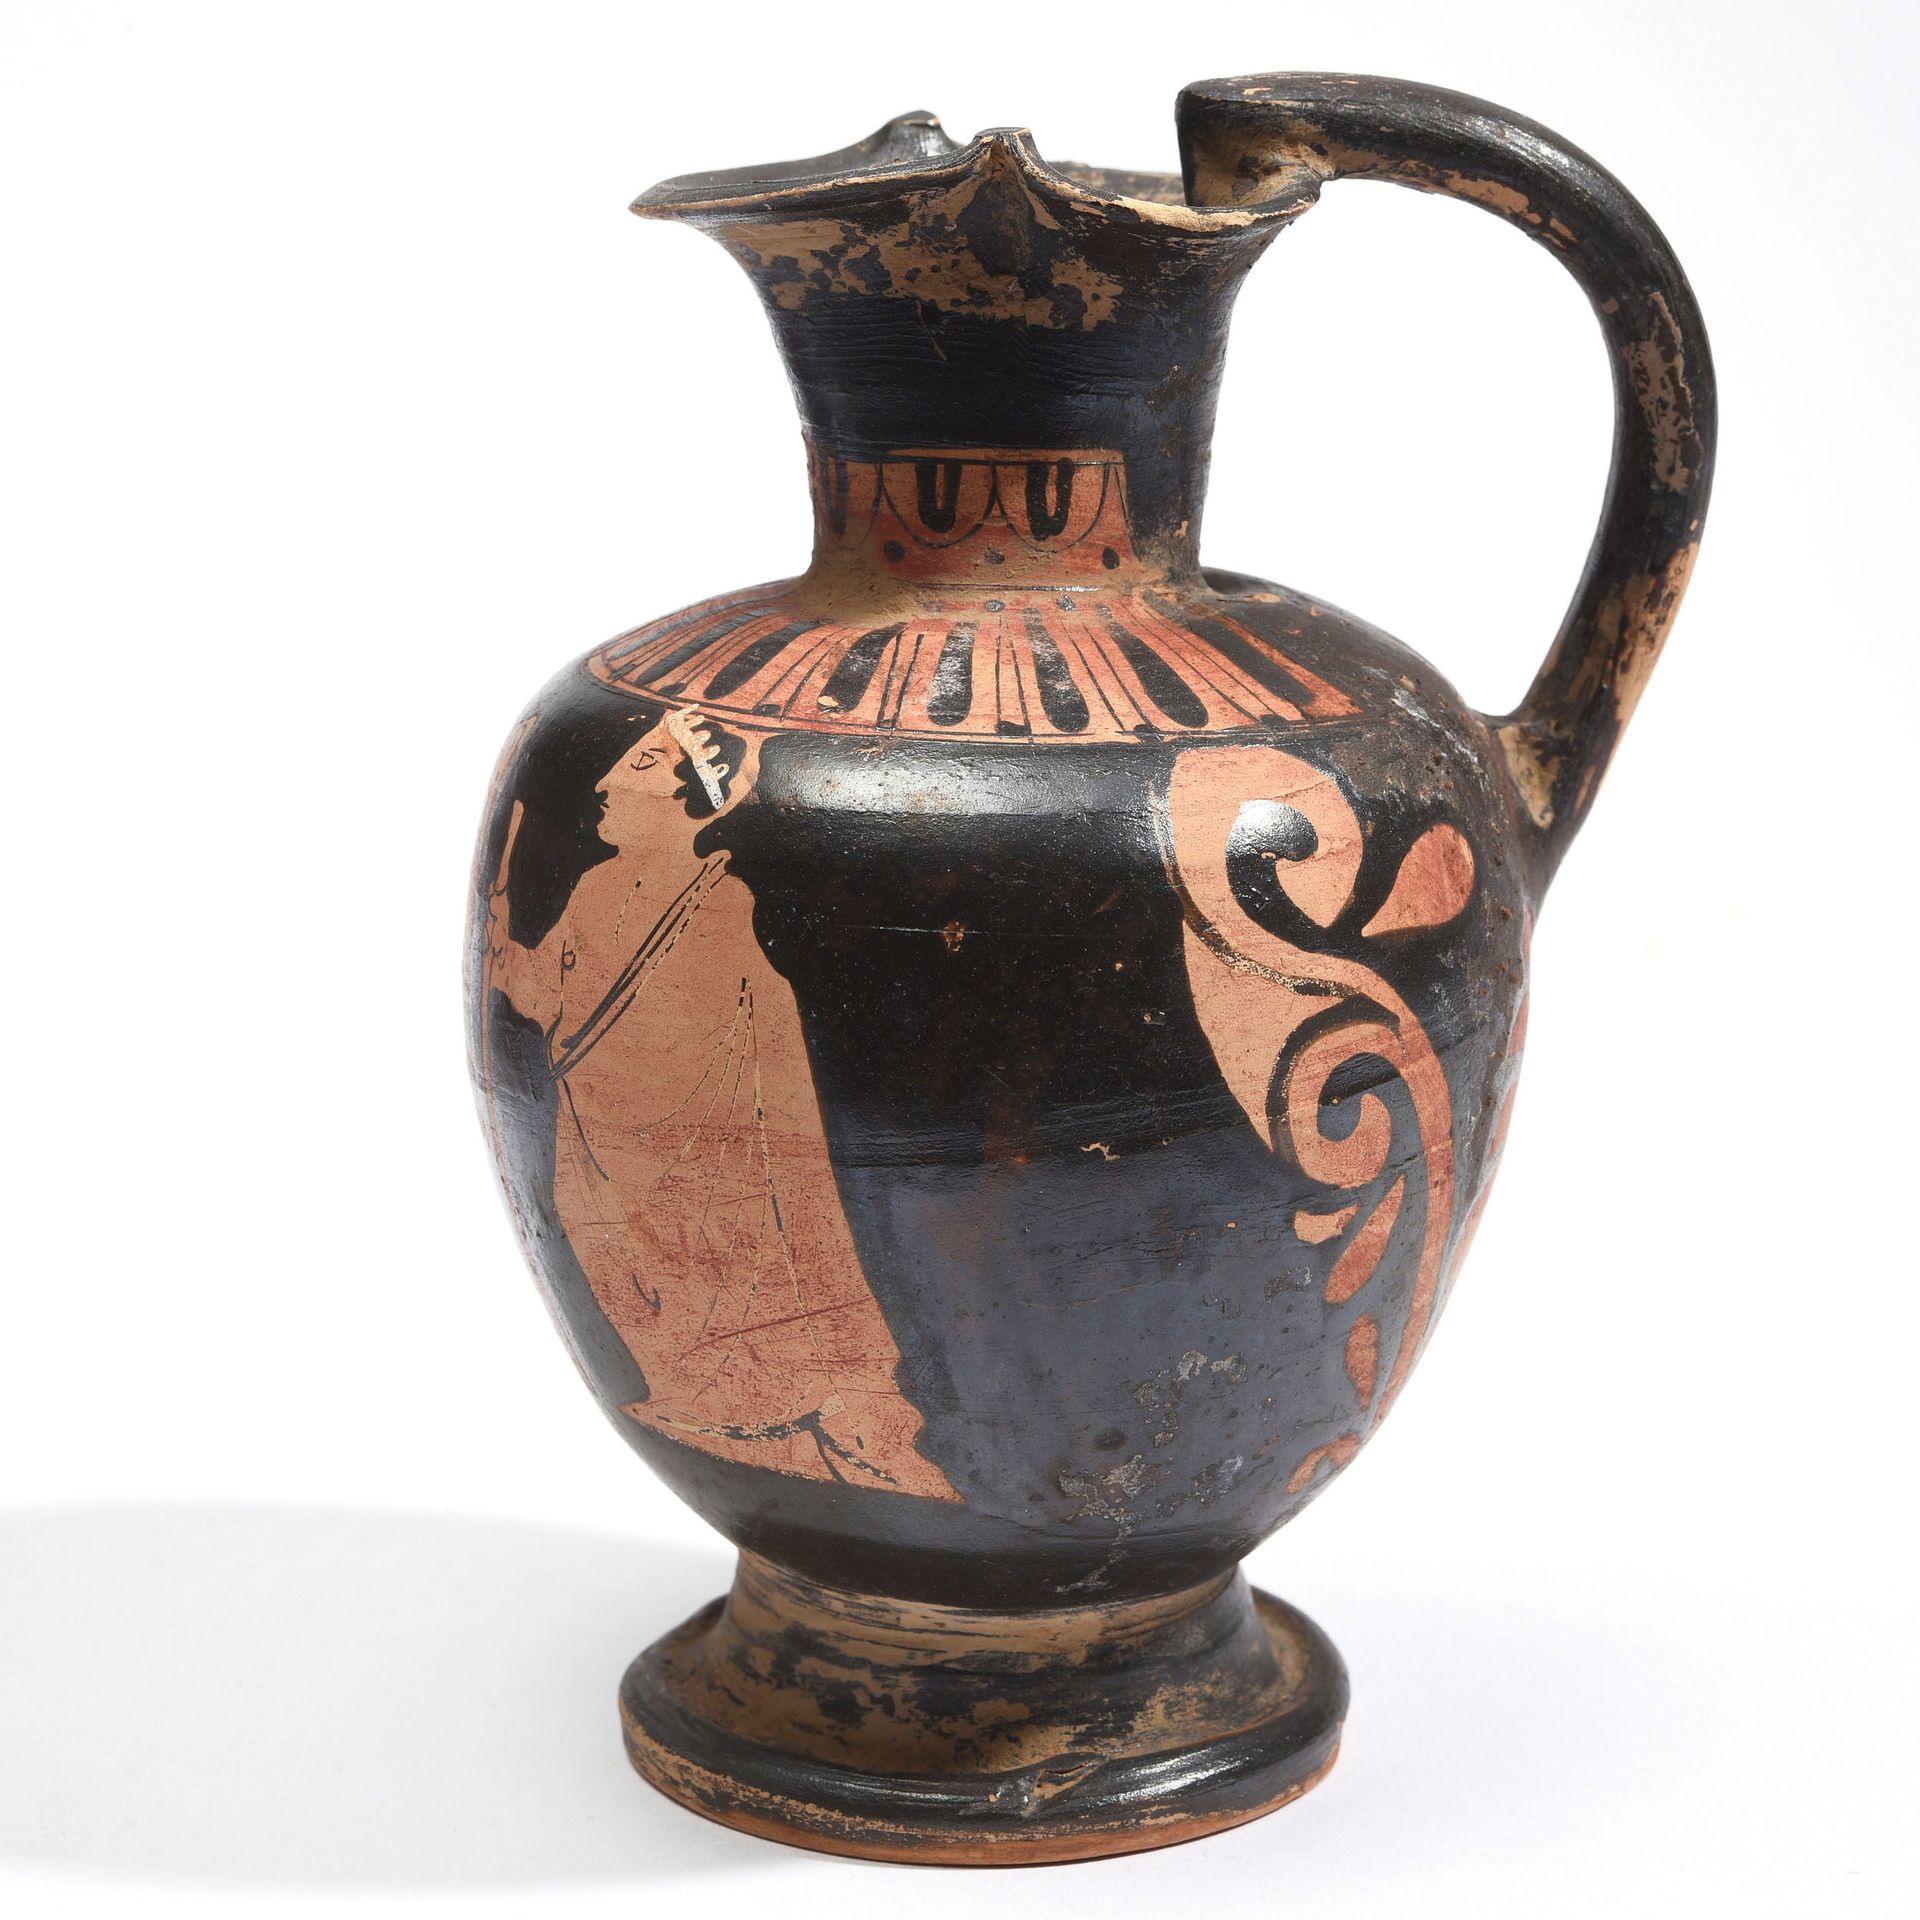 Null OENOCHOE WITH RED FIGURES

Magna Graecia, Apulian art, second half of the 4&hellip;